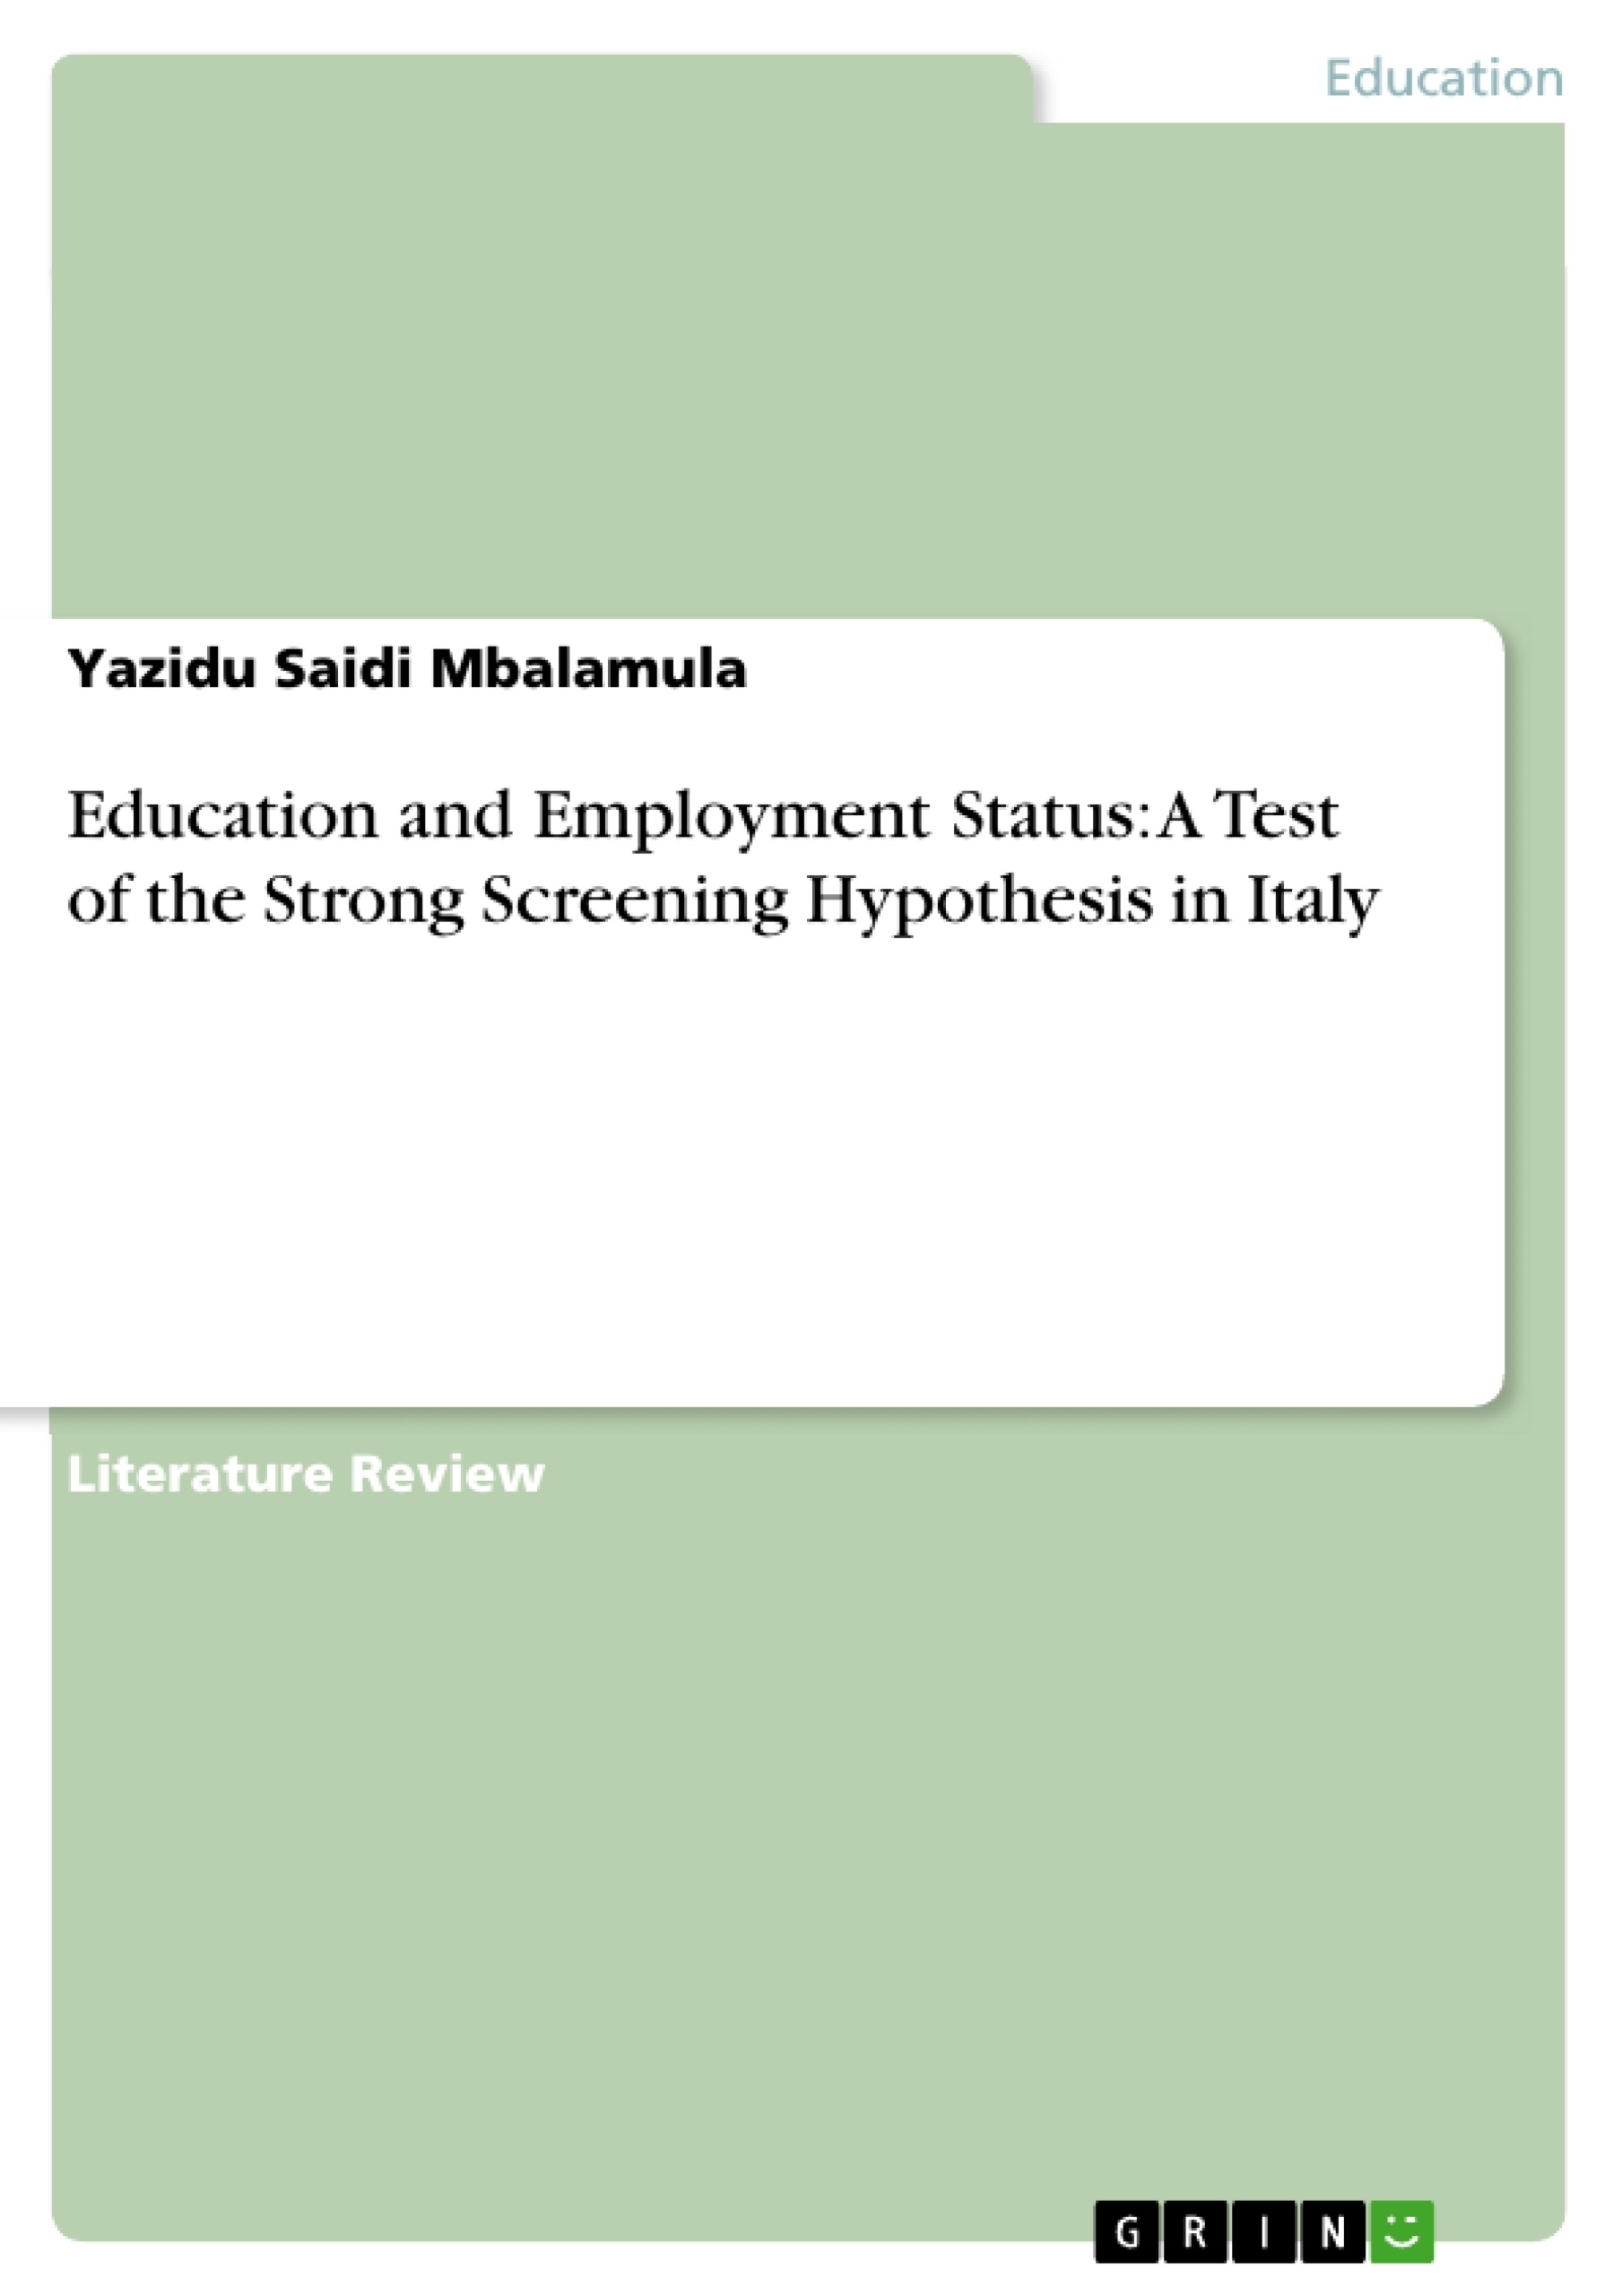 Title: Education and Employment Status: A Test of the Strong Screening Hypothesis in Italy